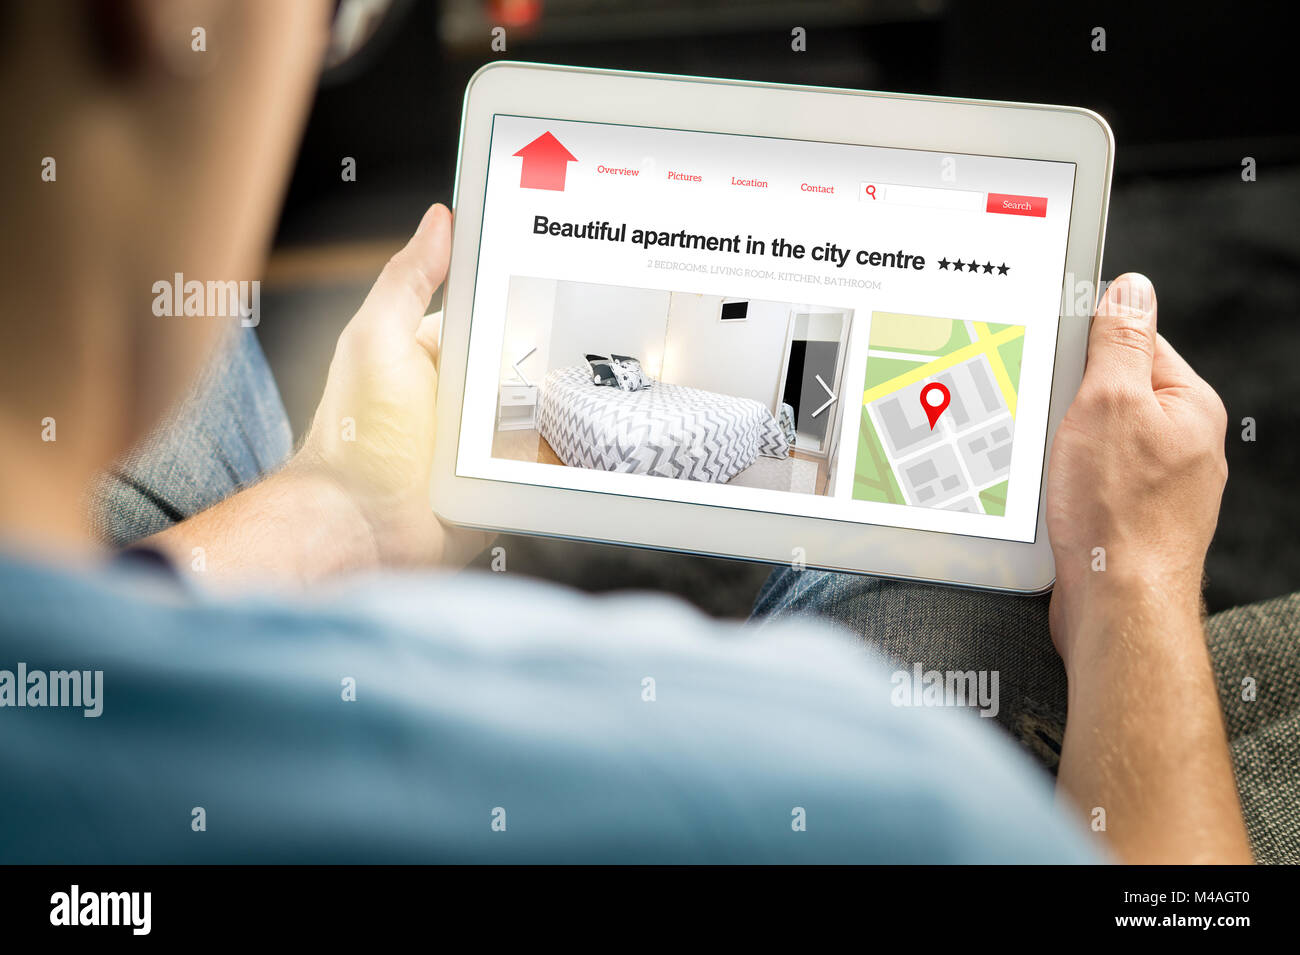 Man search apartments and houses online with mobile device. Holiday home rental or real estate website or application. Imaginary internet marketplace. Stock Photo